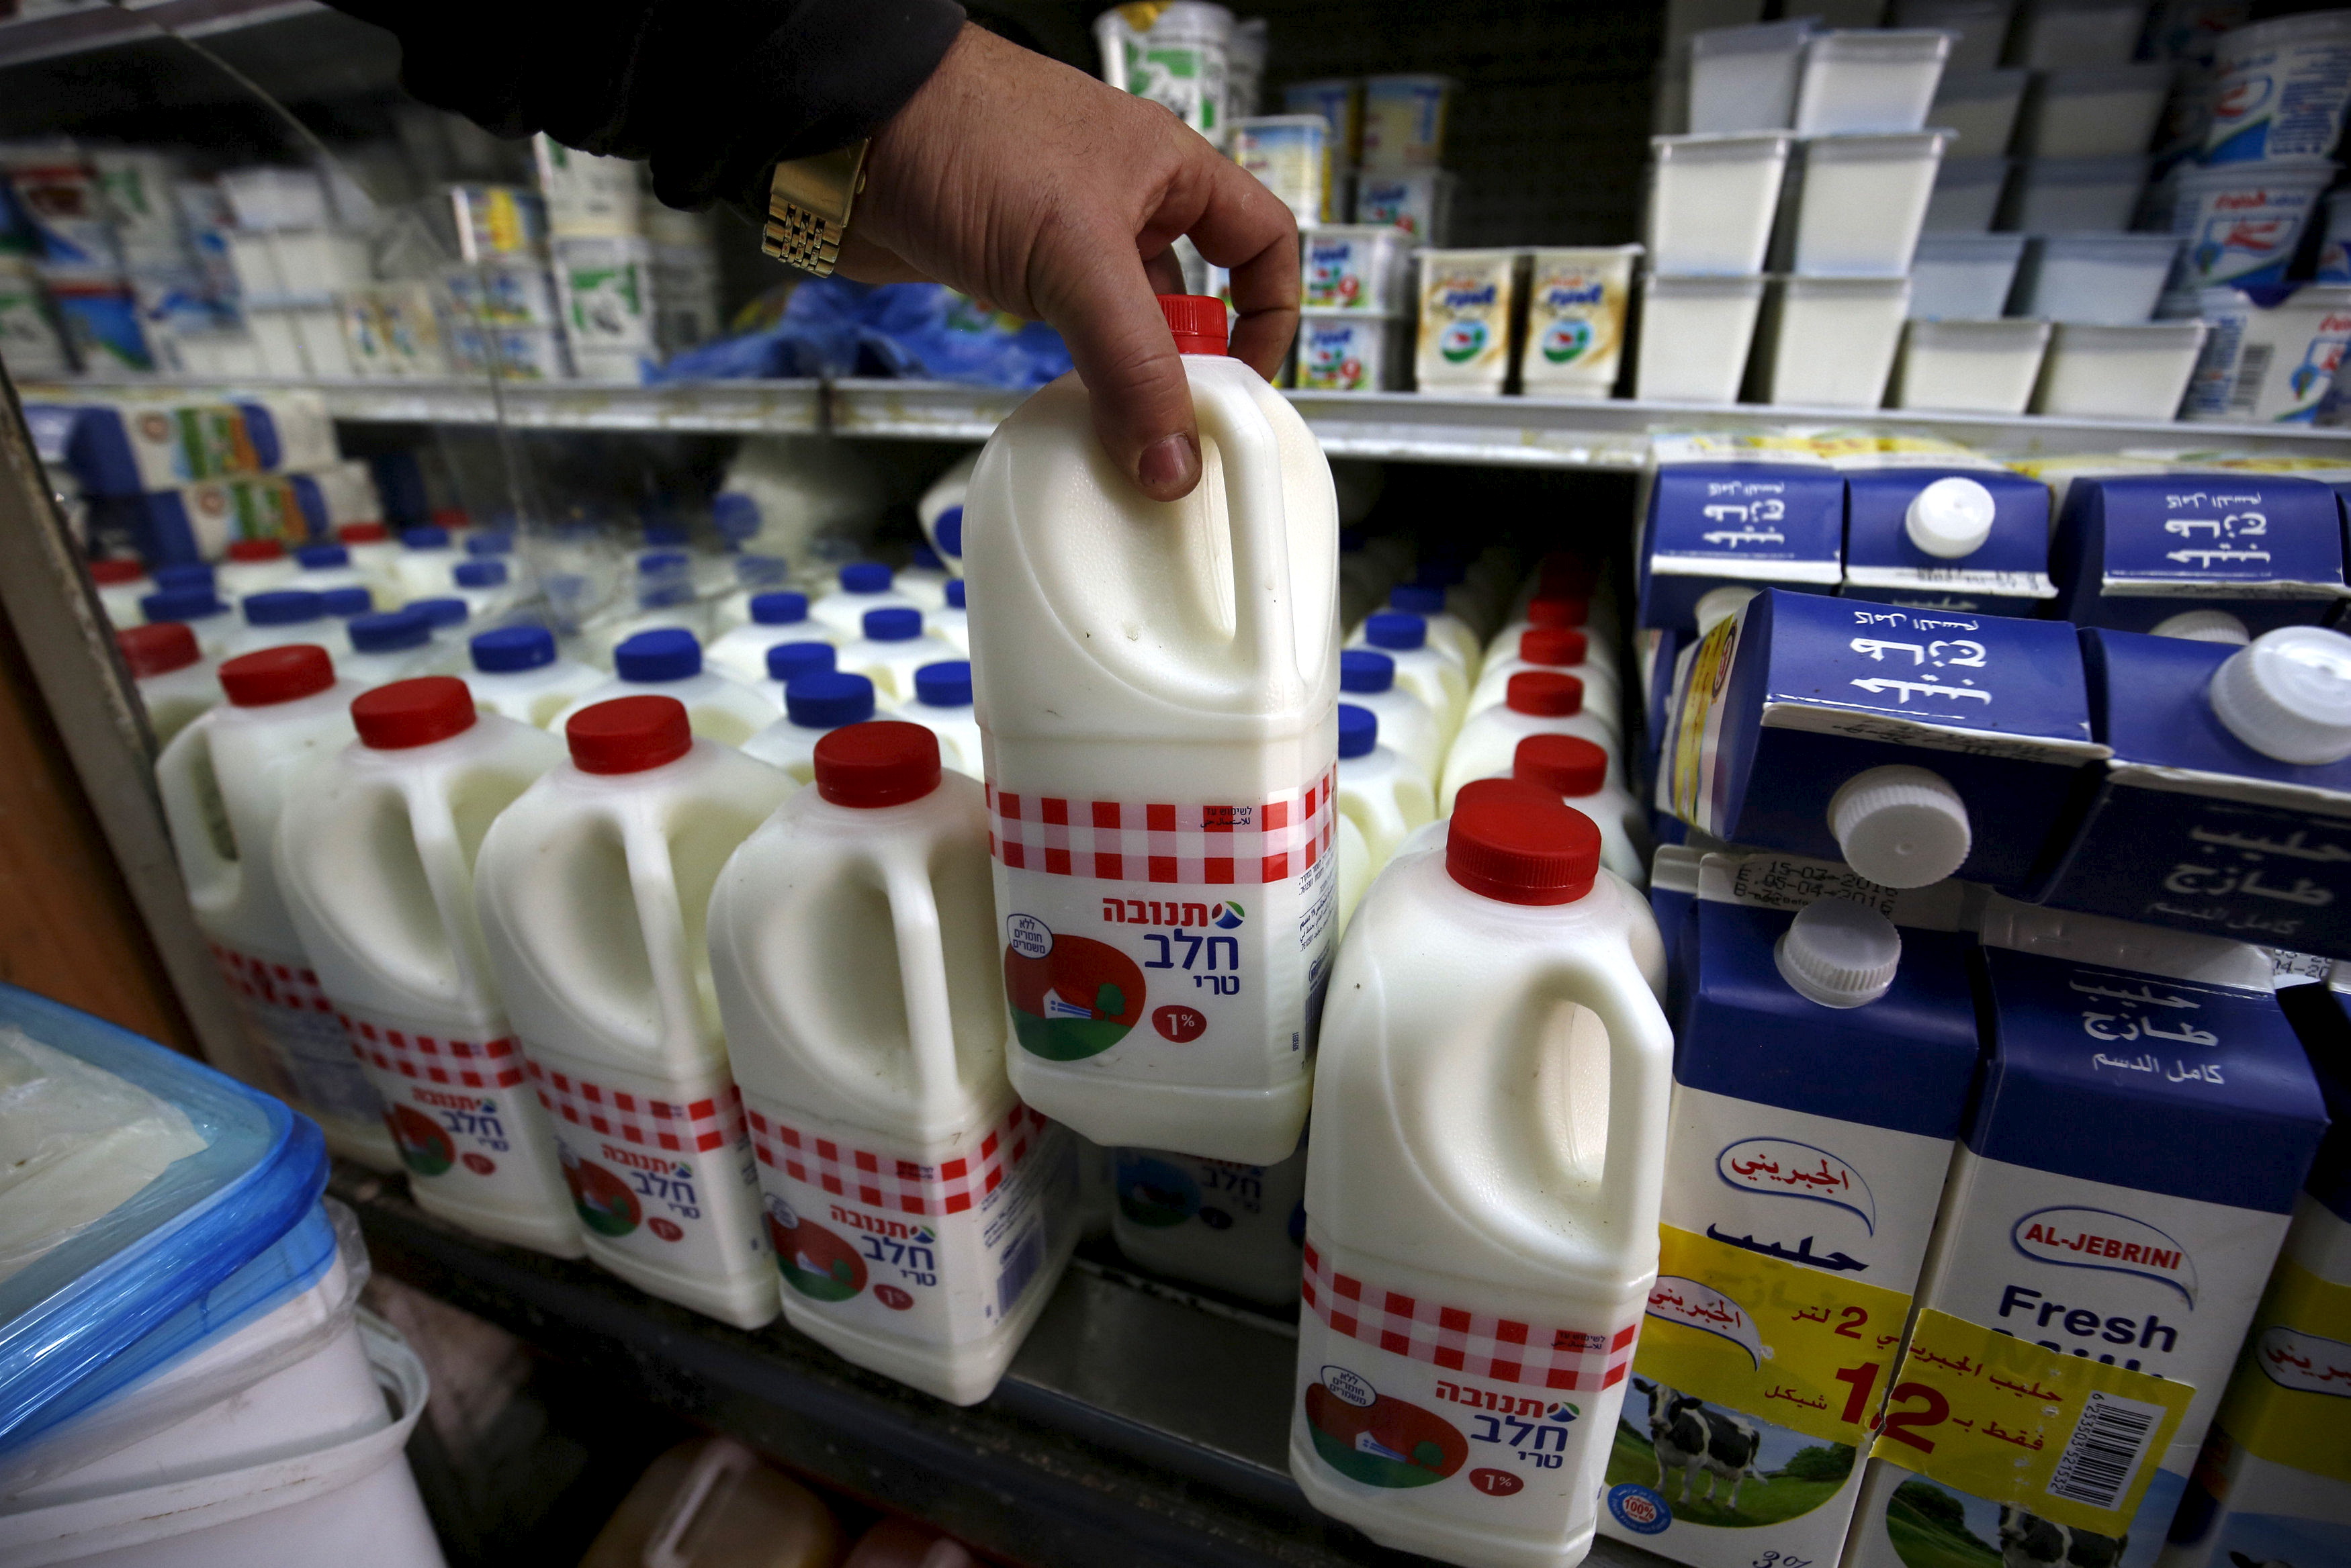 Man shows a bottle of milk produced by Israeli food-maker Tnuva at a supermarket in the West Bank city of Ramallah